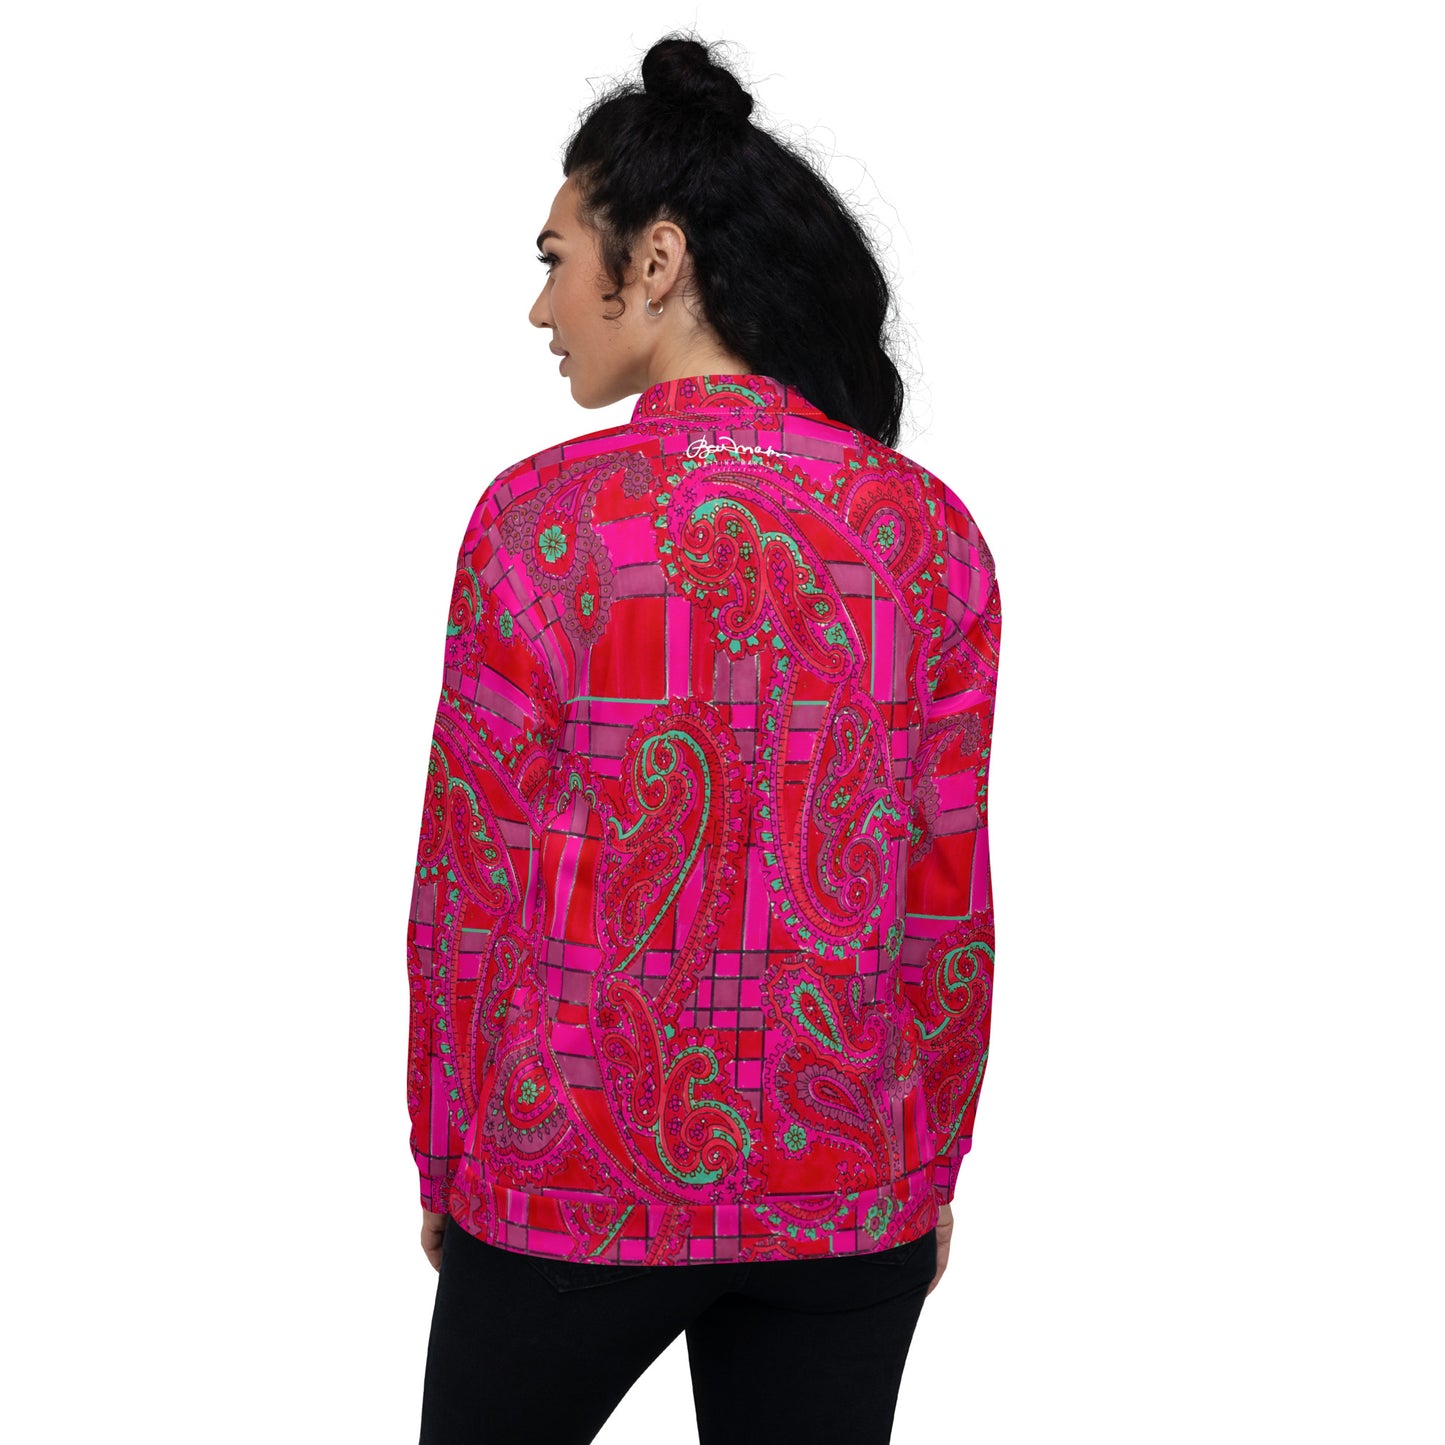 Recycled Unisex Bomber Jacket - Bright Fuscia and Red Poppy Paisley on Plaid - Women